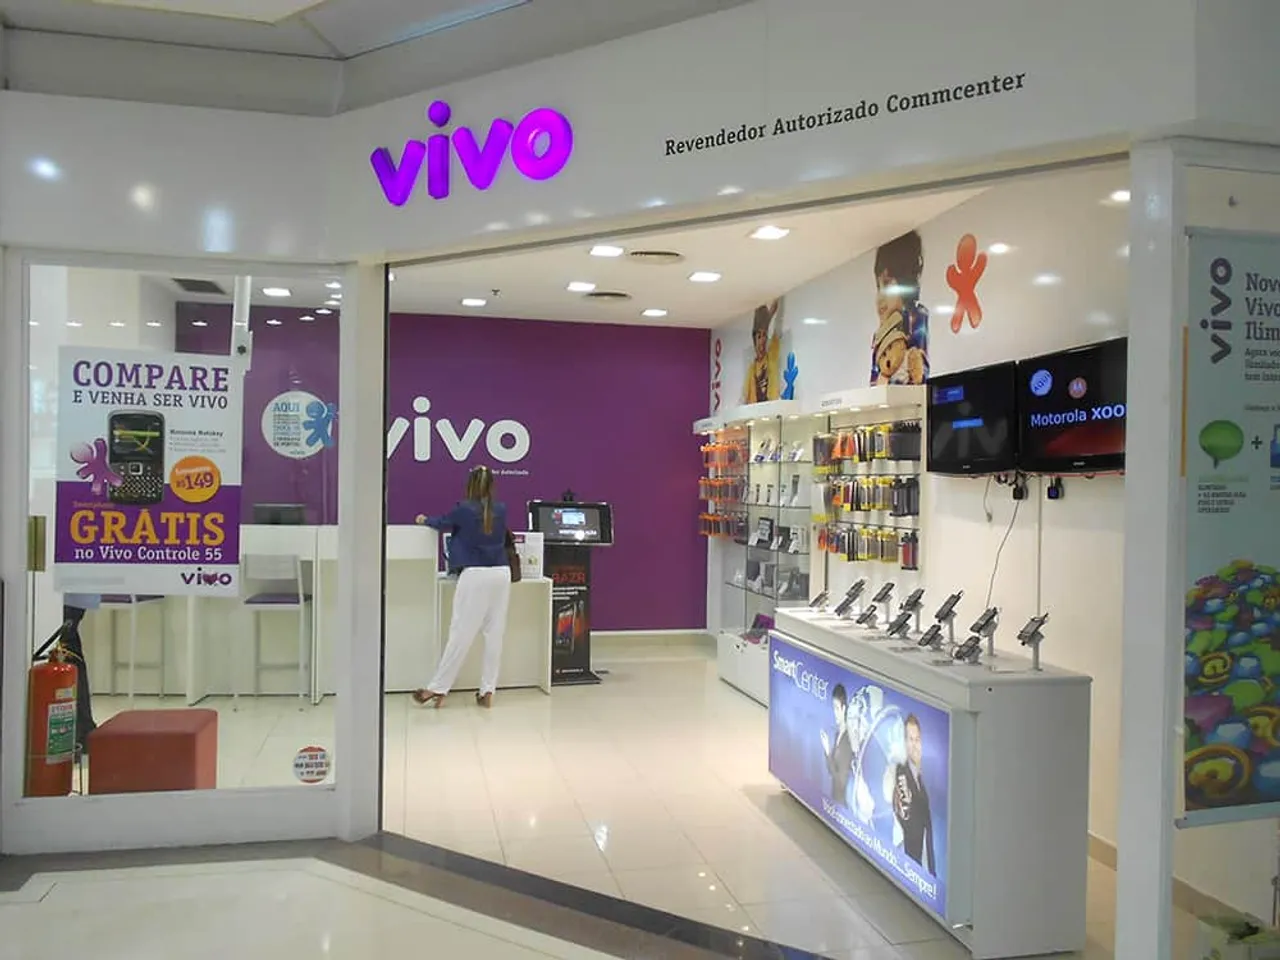 Vivo India transferred Rs 62,476 crore abroad, primarily to China, claims ED